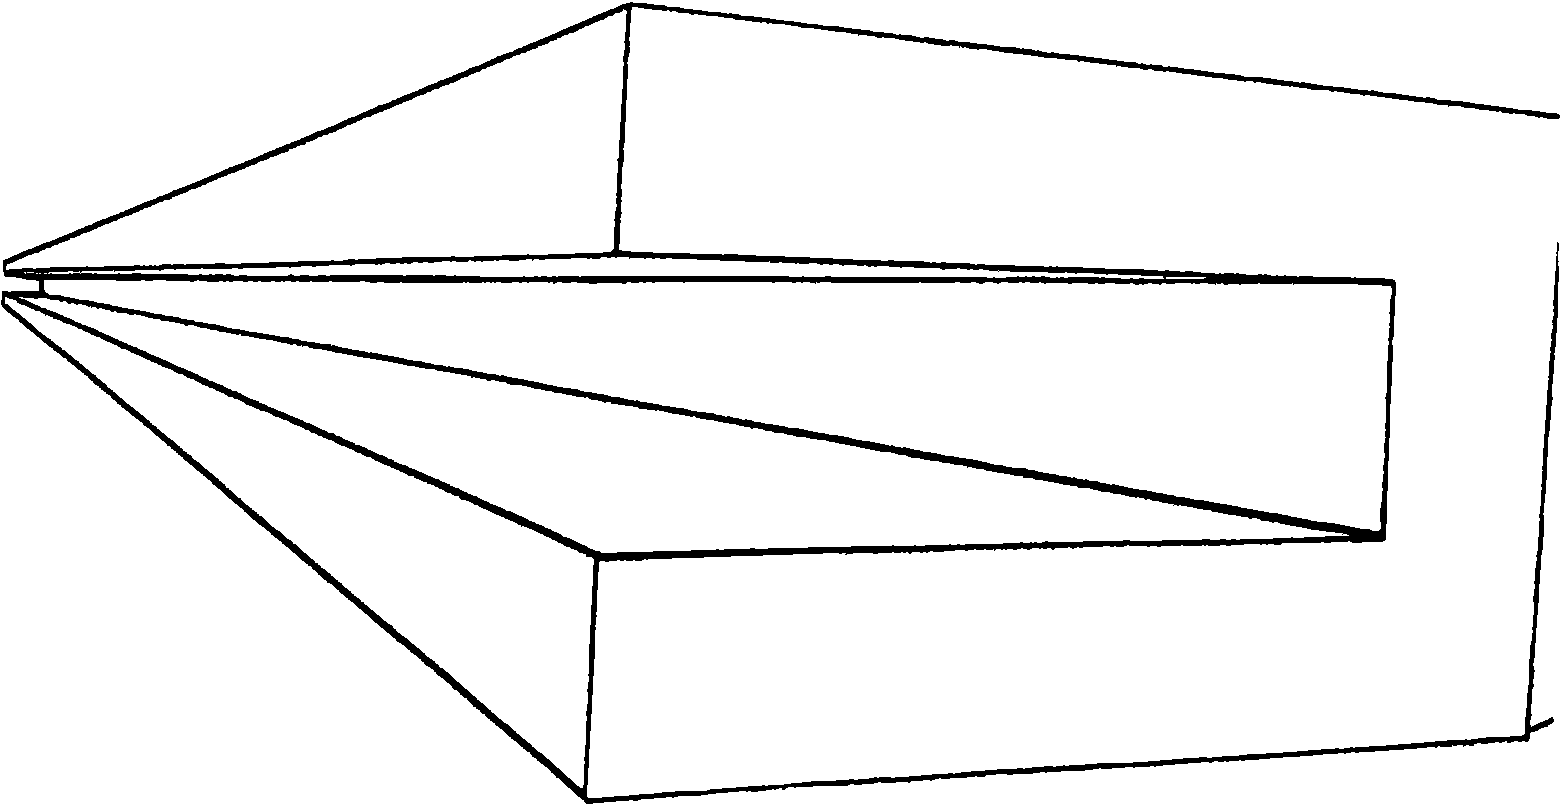 Reinforced masonry panel structures